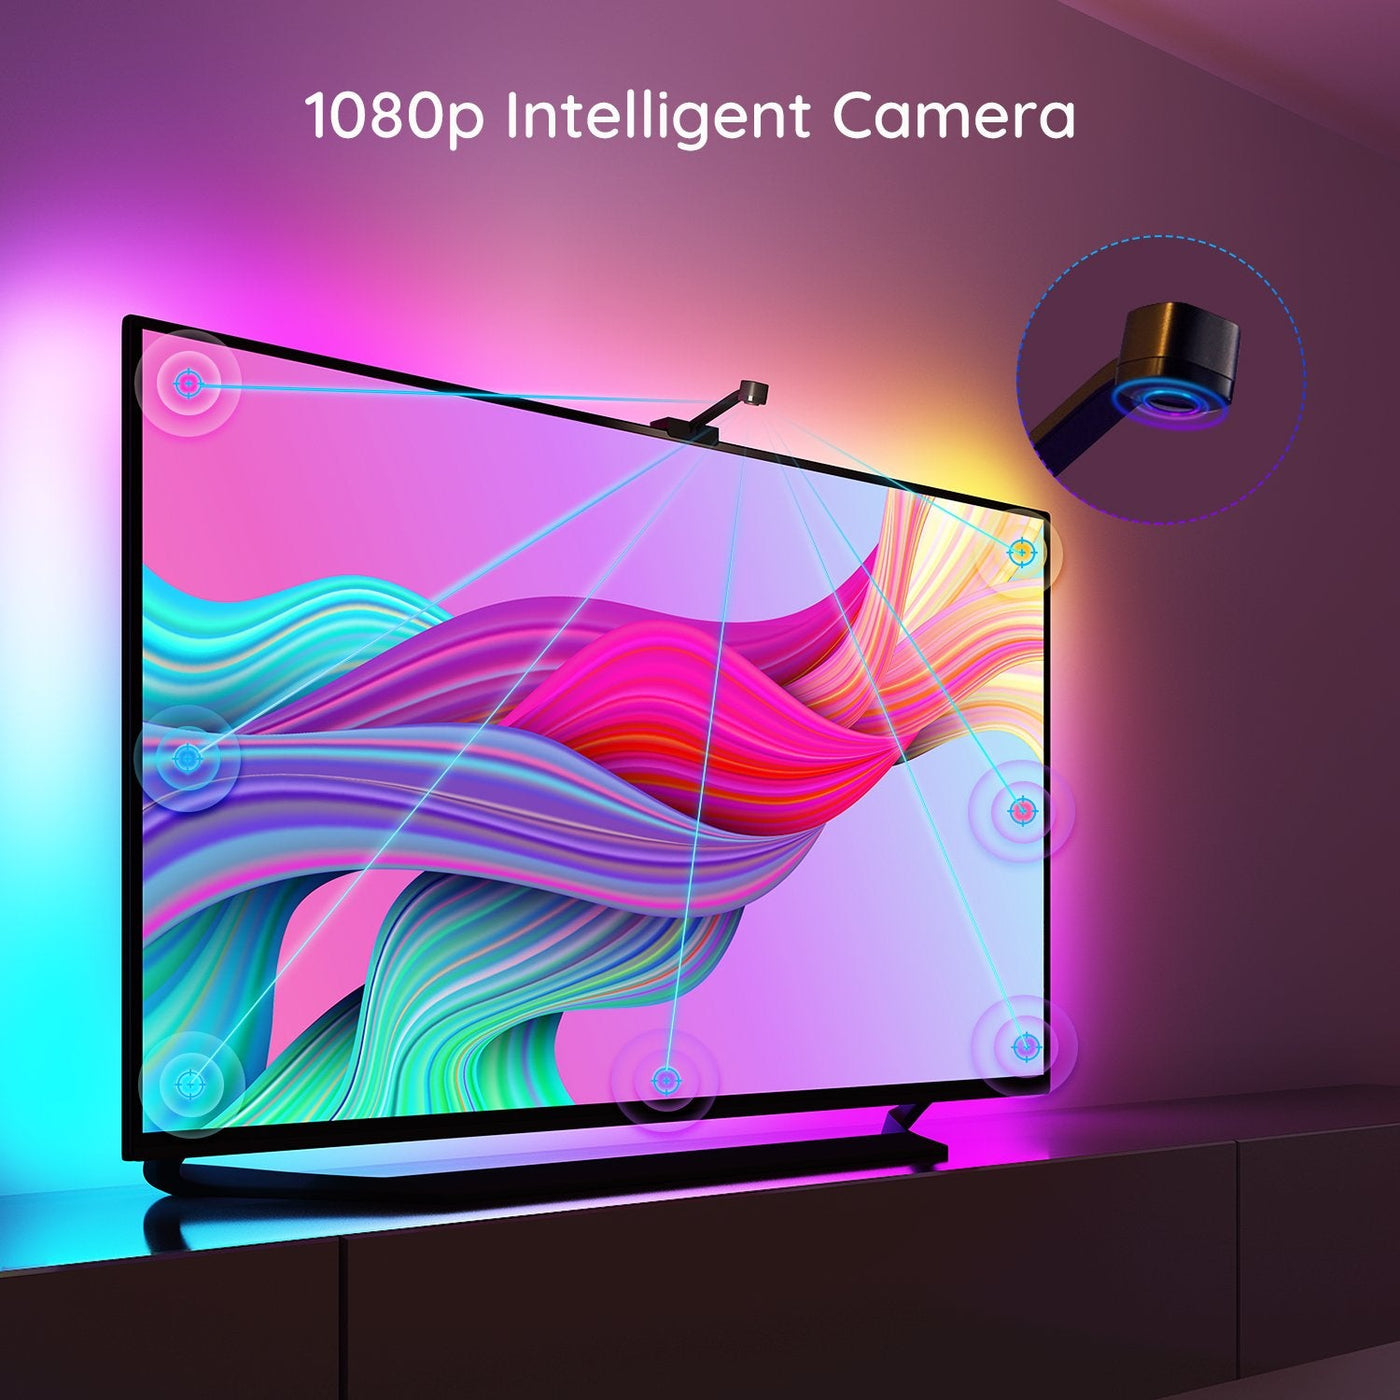 Govee Immersion Wi-Fi TV Backlights with 1080p camera